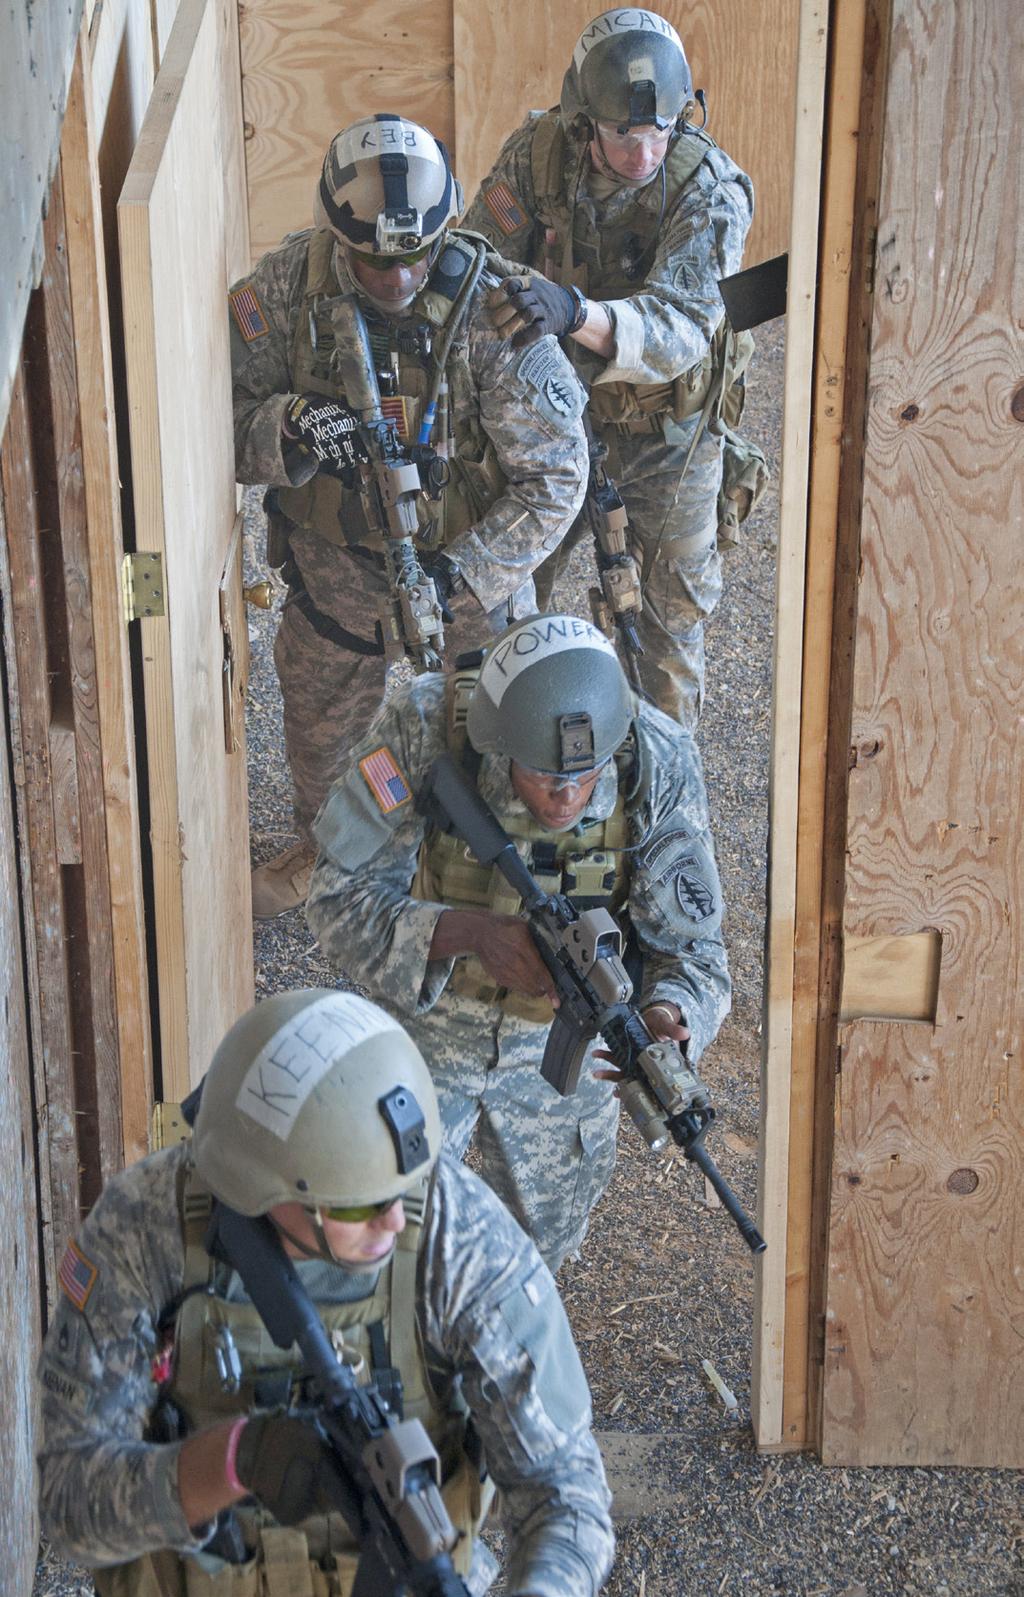 Instructors observe from the catwalk above to assess the Soldier s performance during qualification training at Fort McClellan, September 21, 2012. Command Sgt.